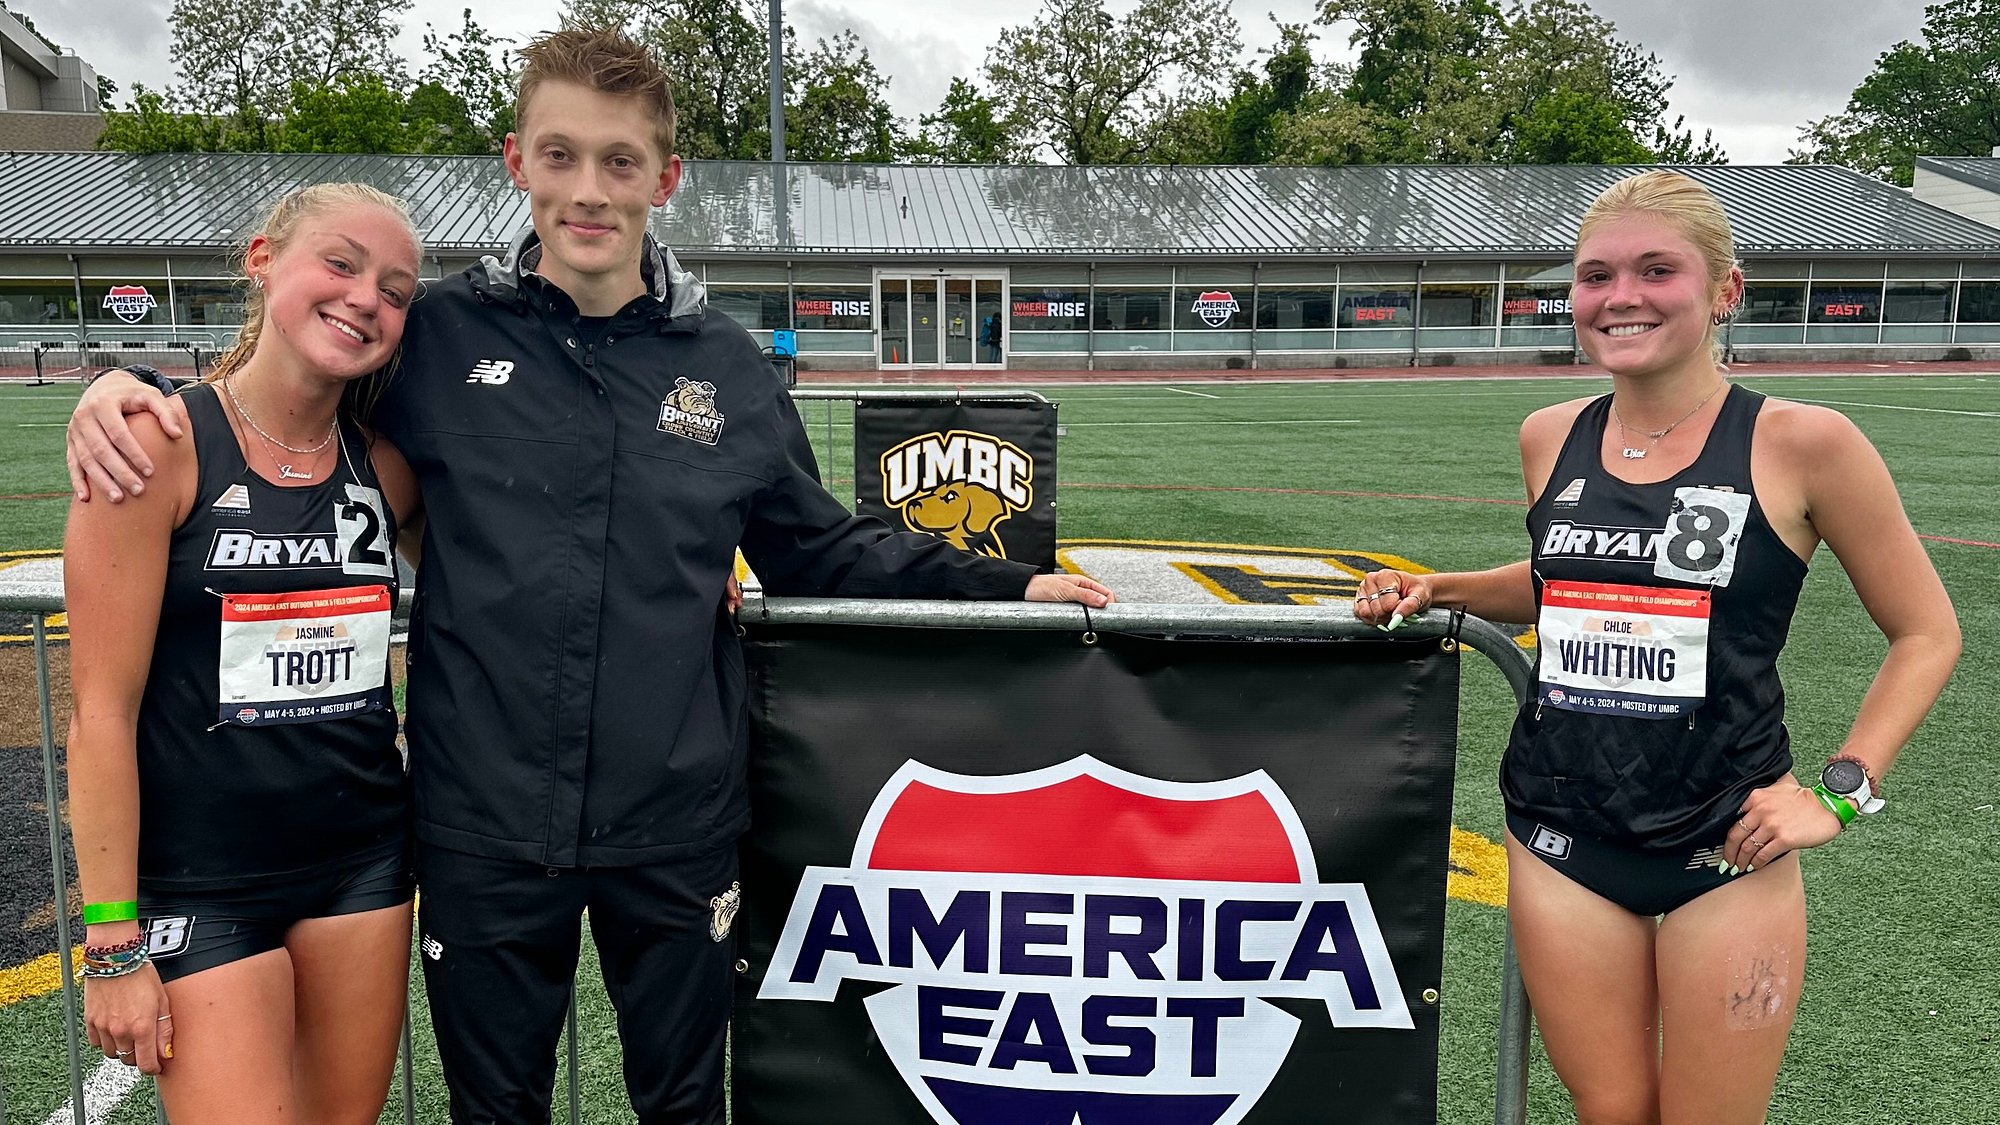 Bulldogs win five medals at Day 1 of the America East Championships